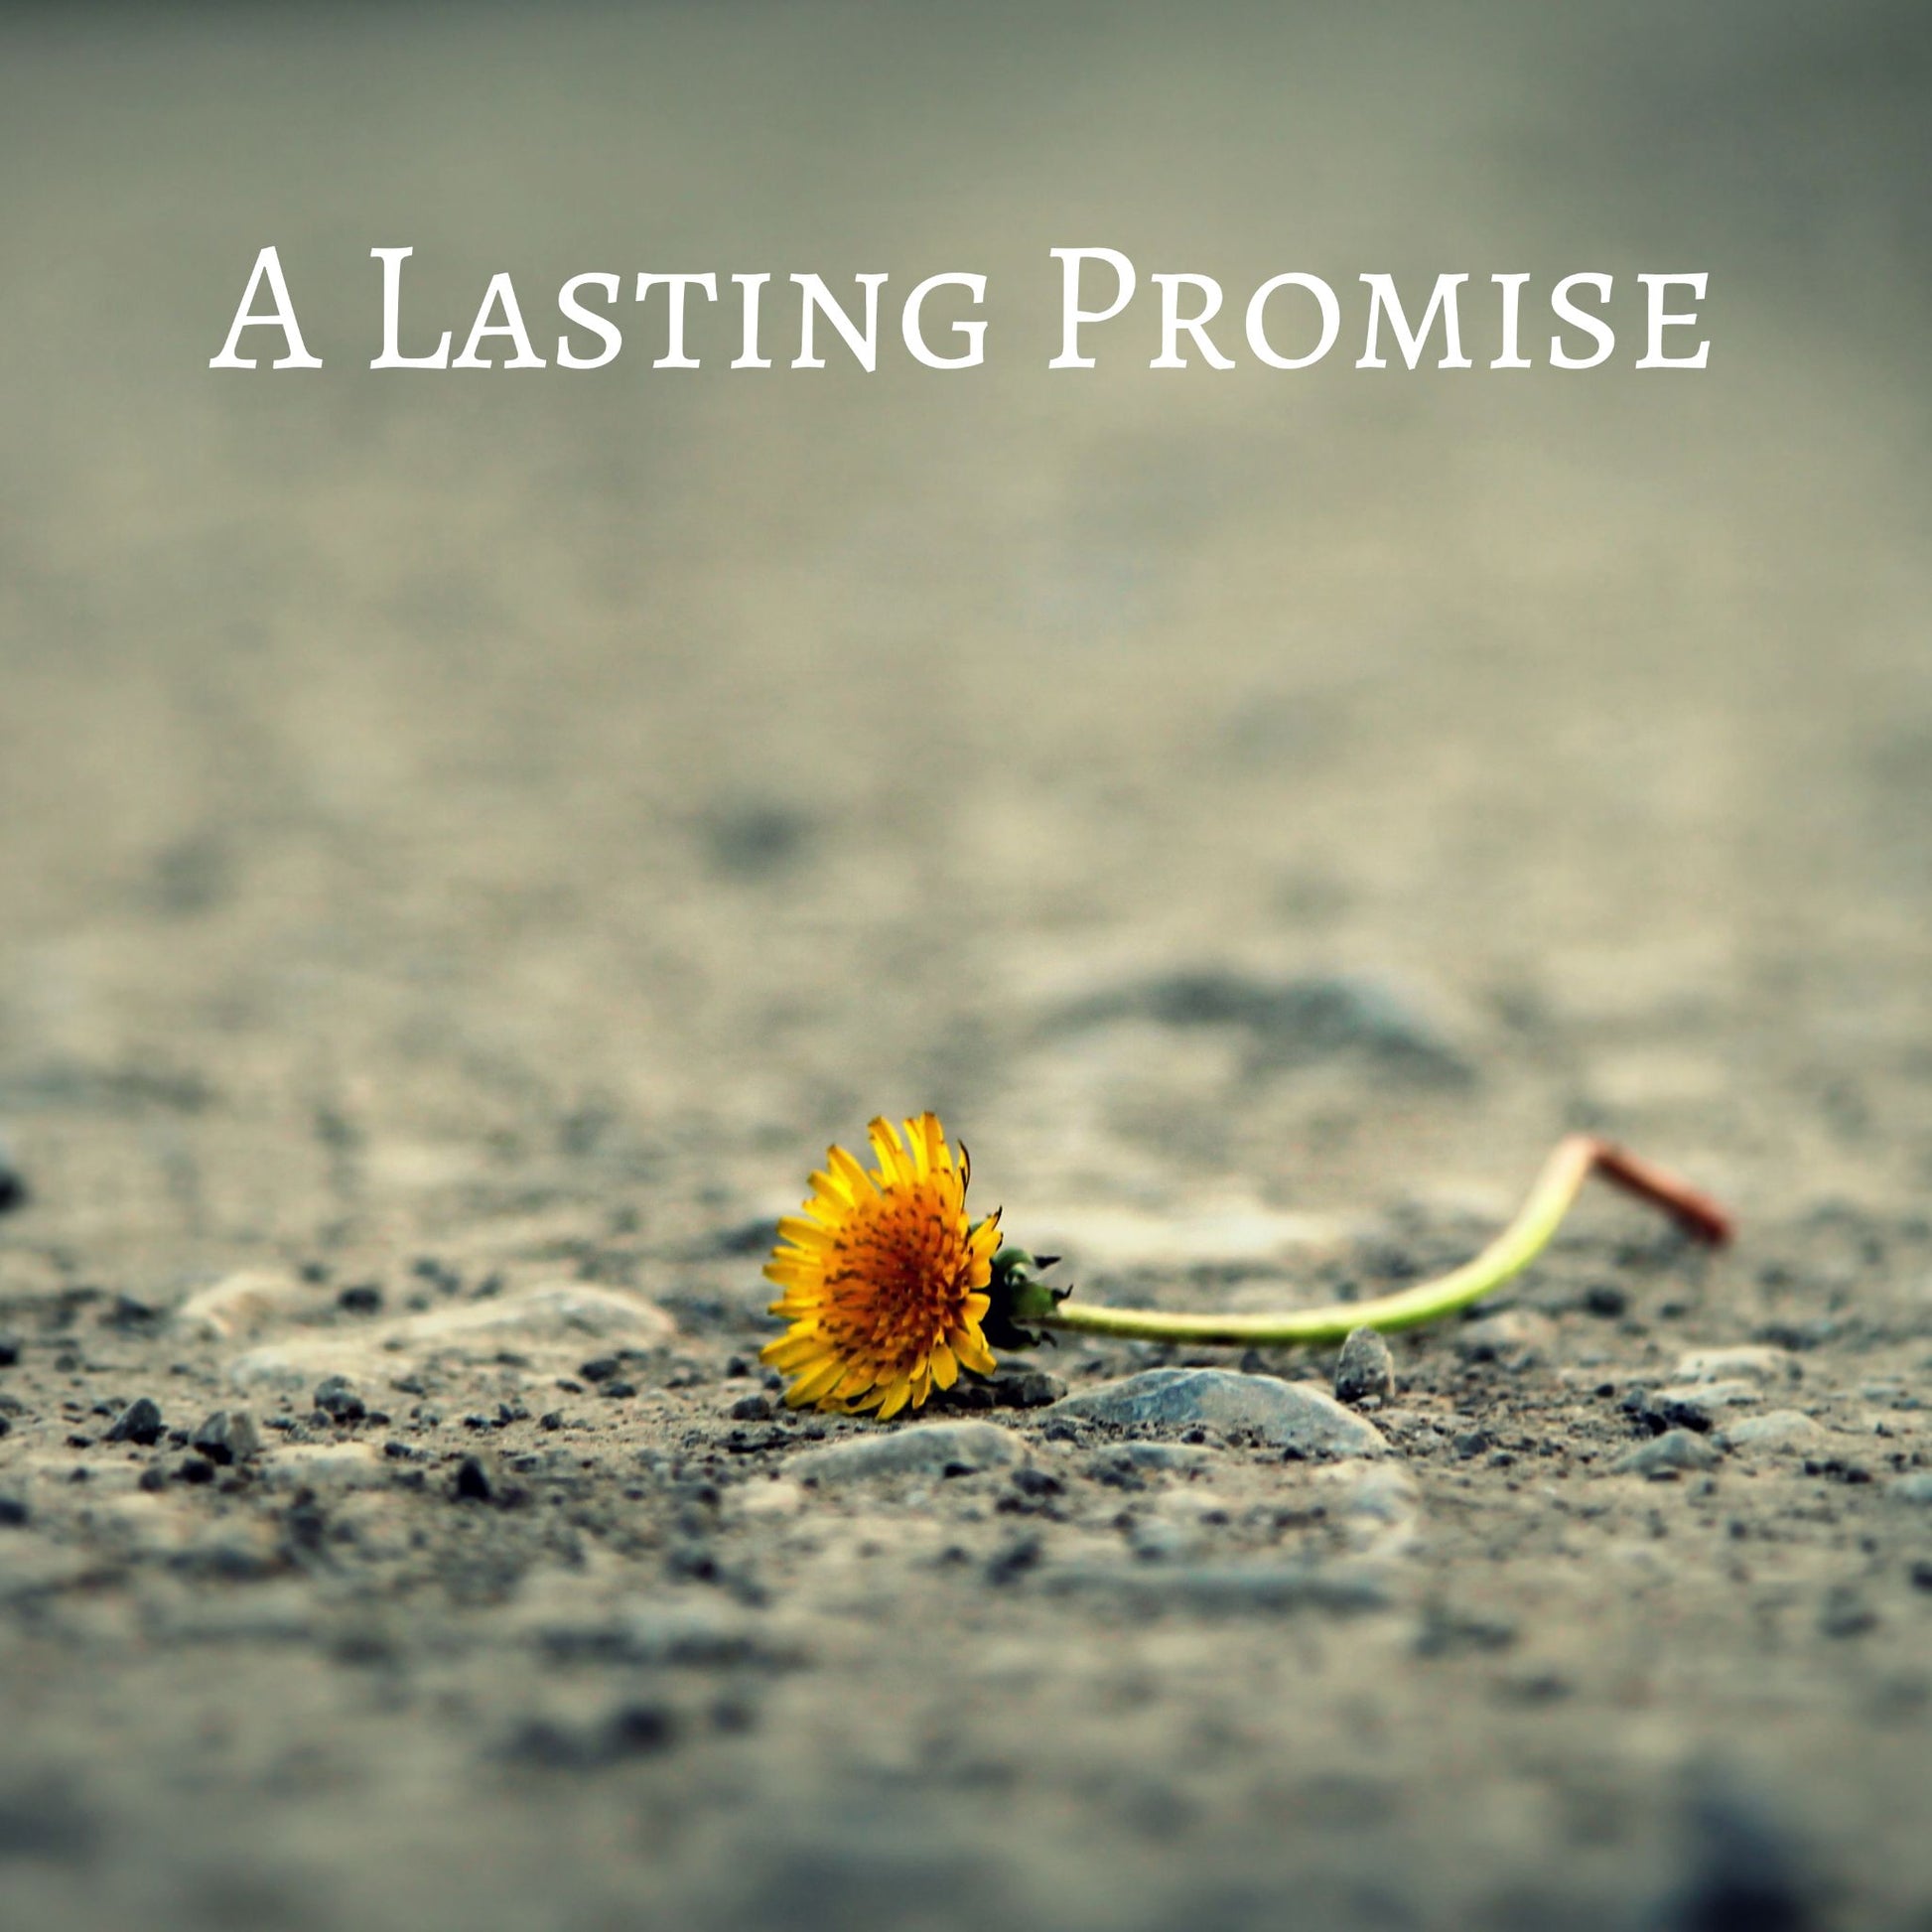 CD Cover of song A Lasting Promise